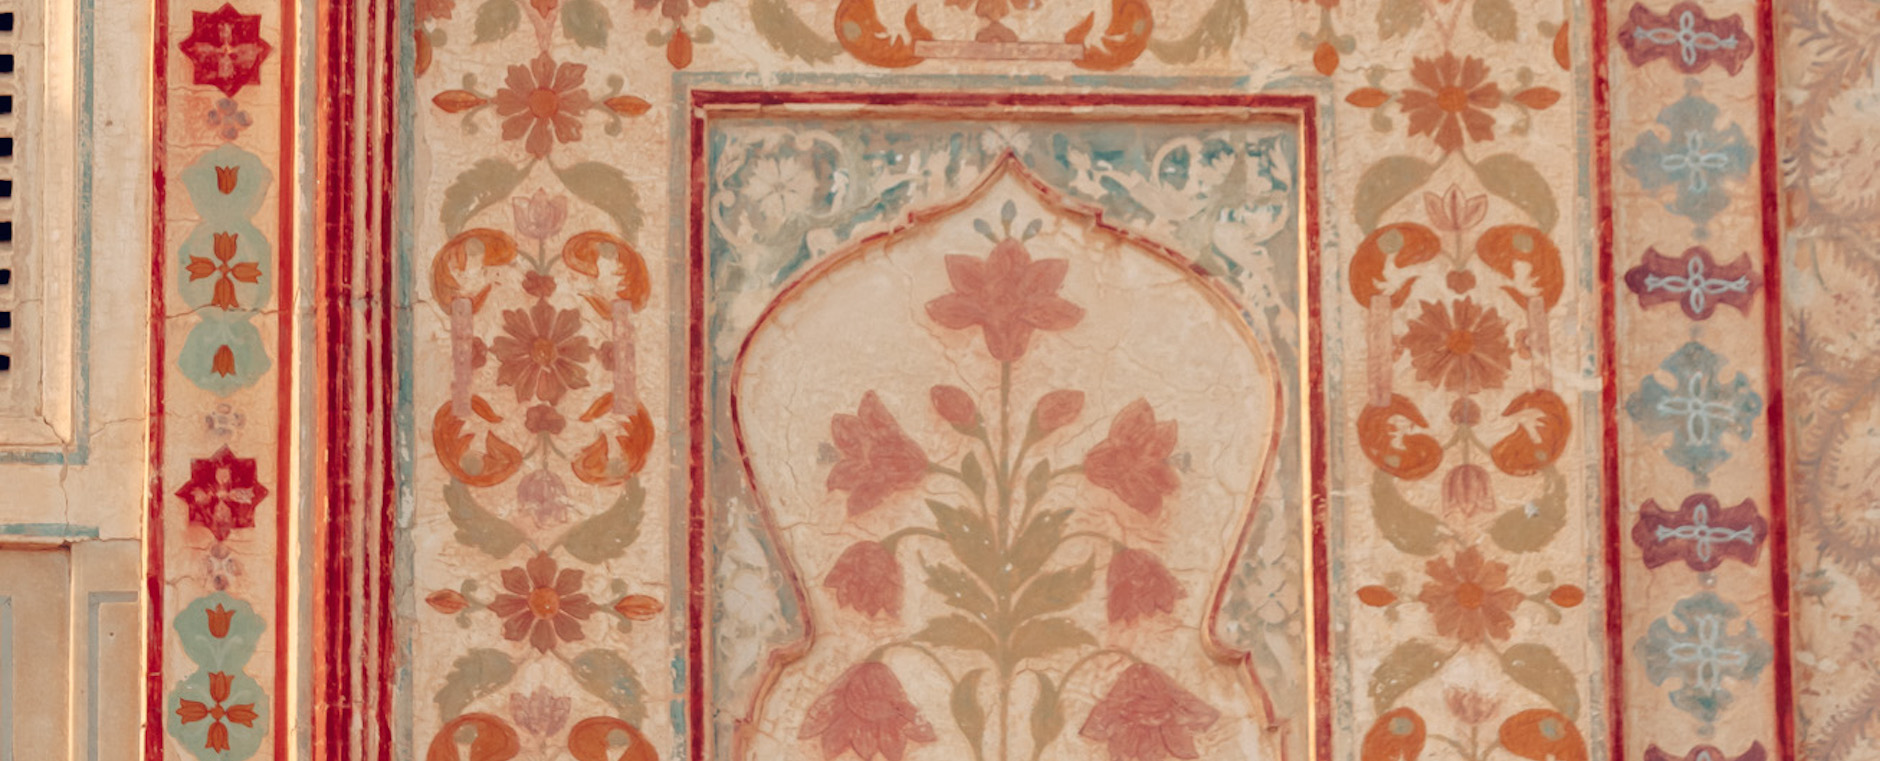 Inspiration and poetry :  flowers in the Mughal Empire